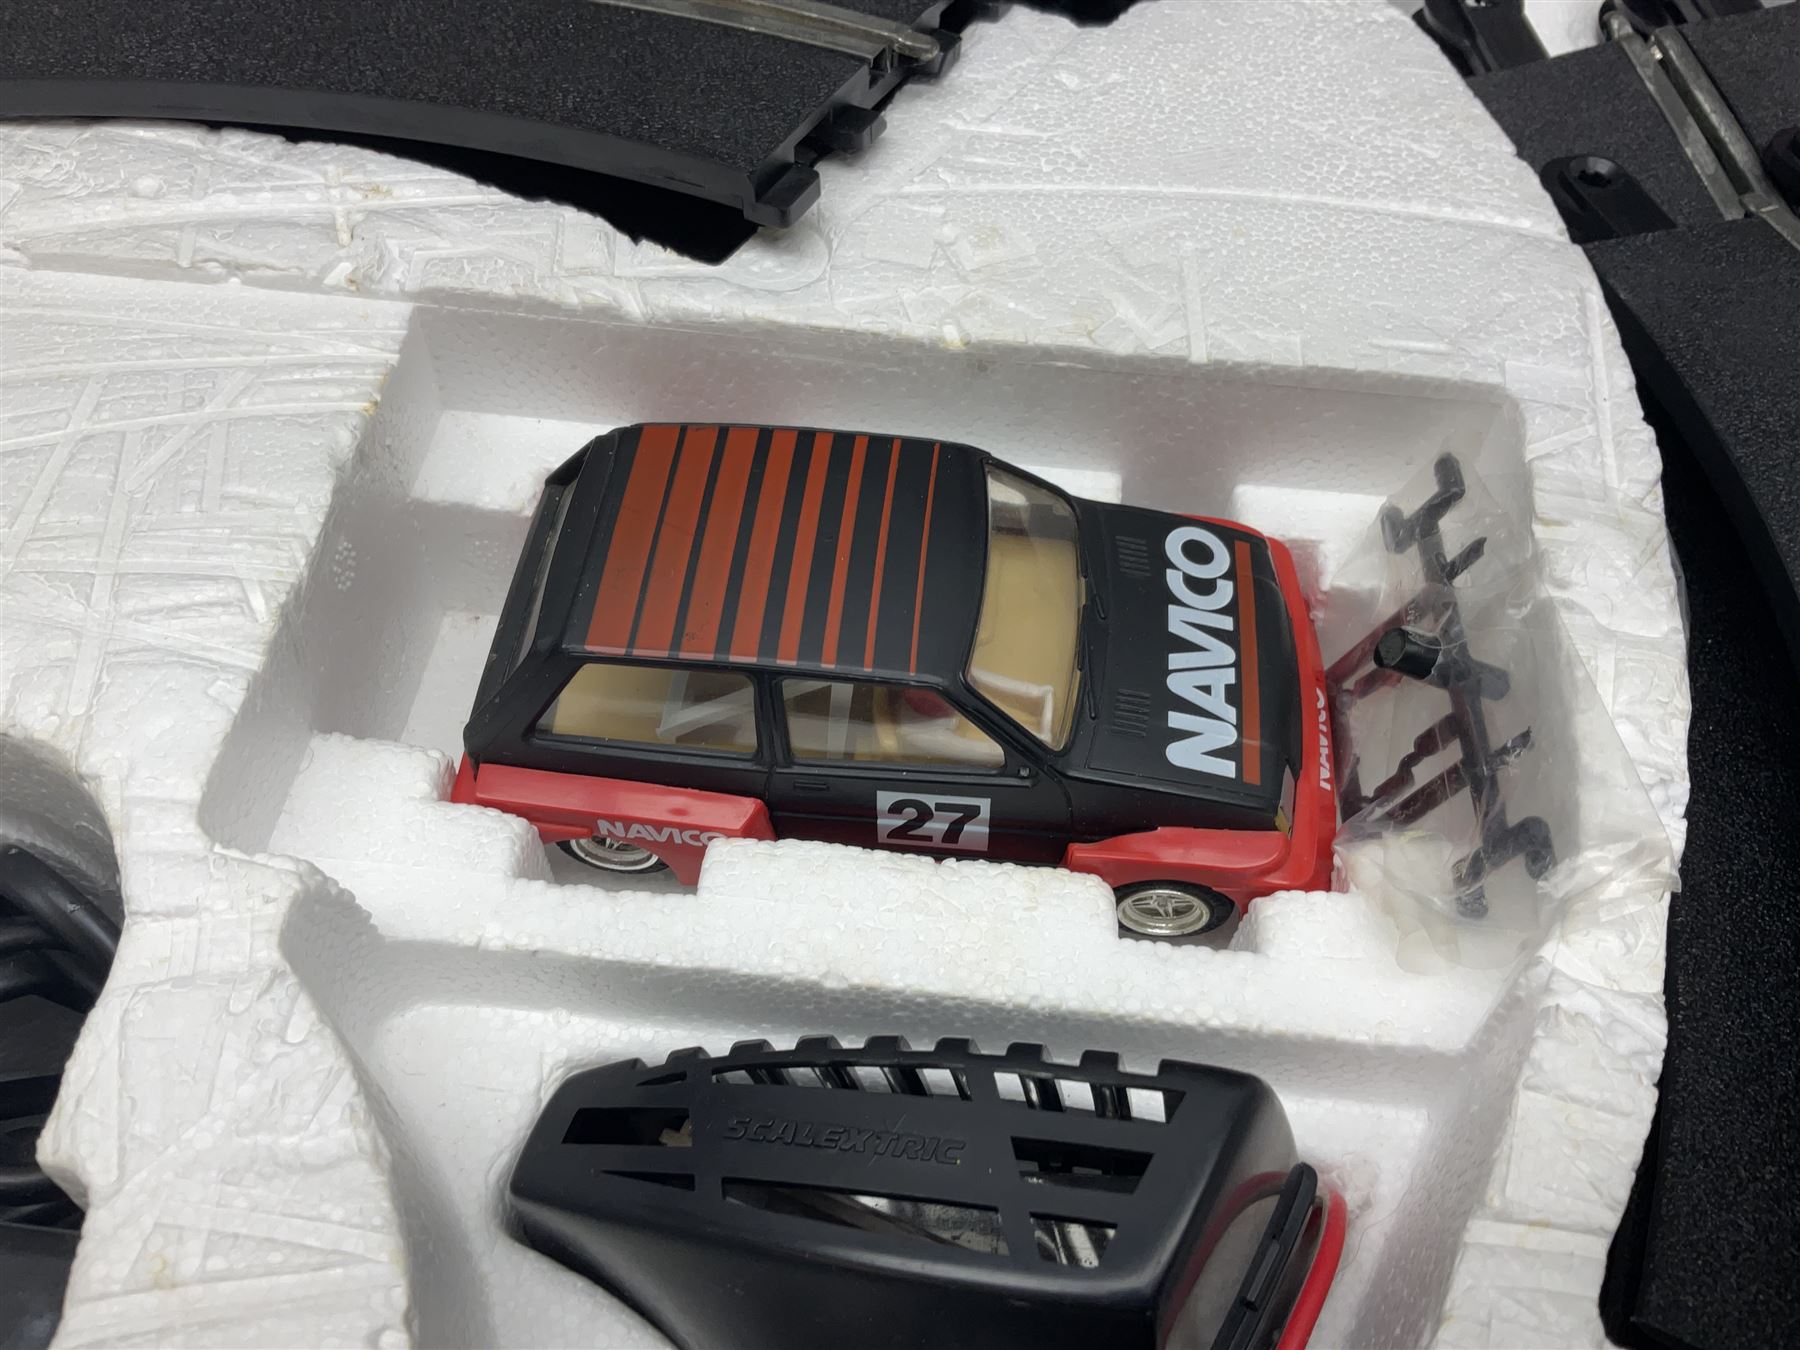 Scalextric - Rallye Internationale set with Audi Quattro and Austin Metro; boxed with instructions - Image 6 of 6